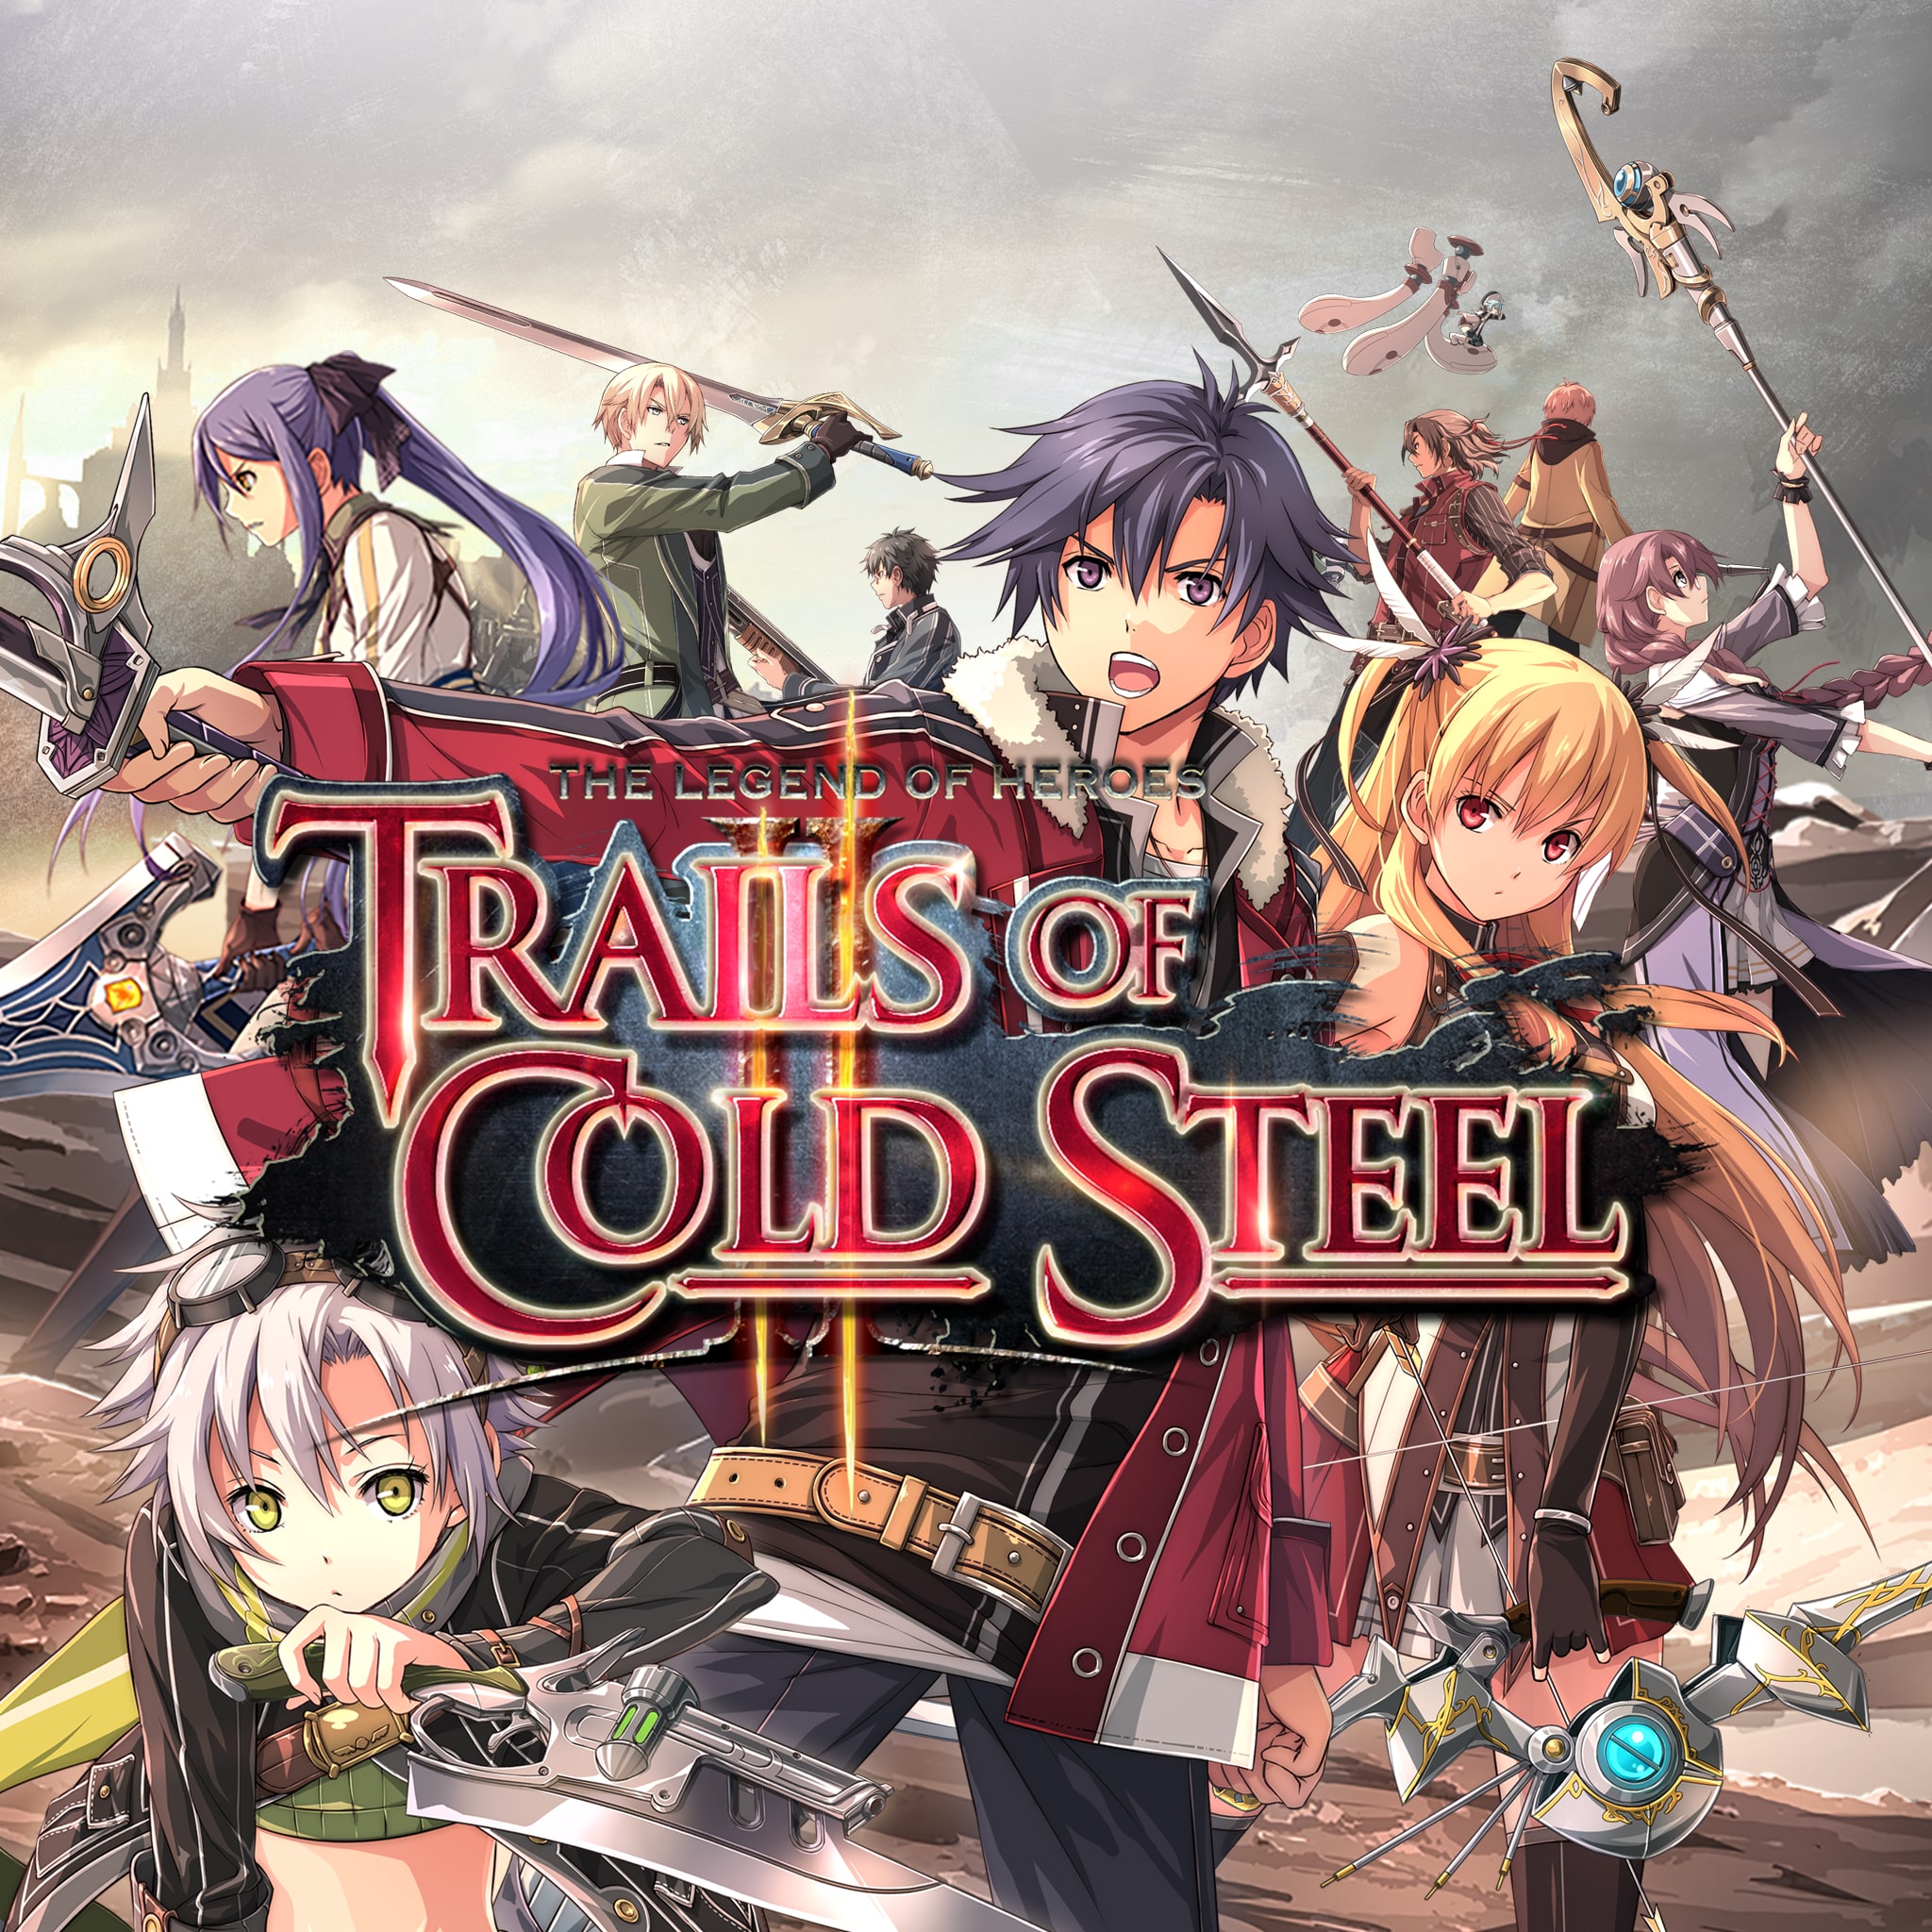 legend-of-heroes-trails-of-cold-steel-ii-relentless-edition-for-playstation-4-ayanawebzine